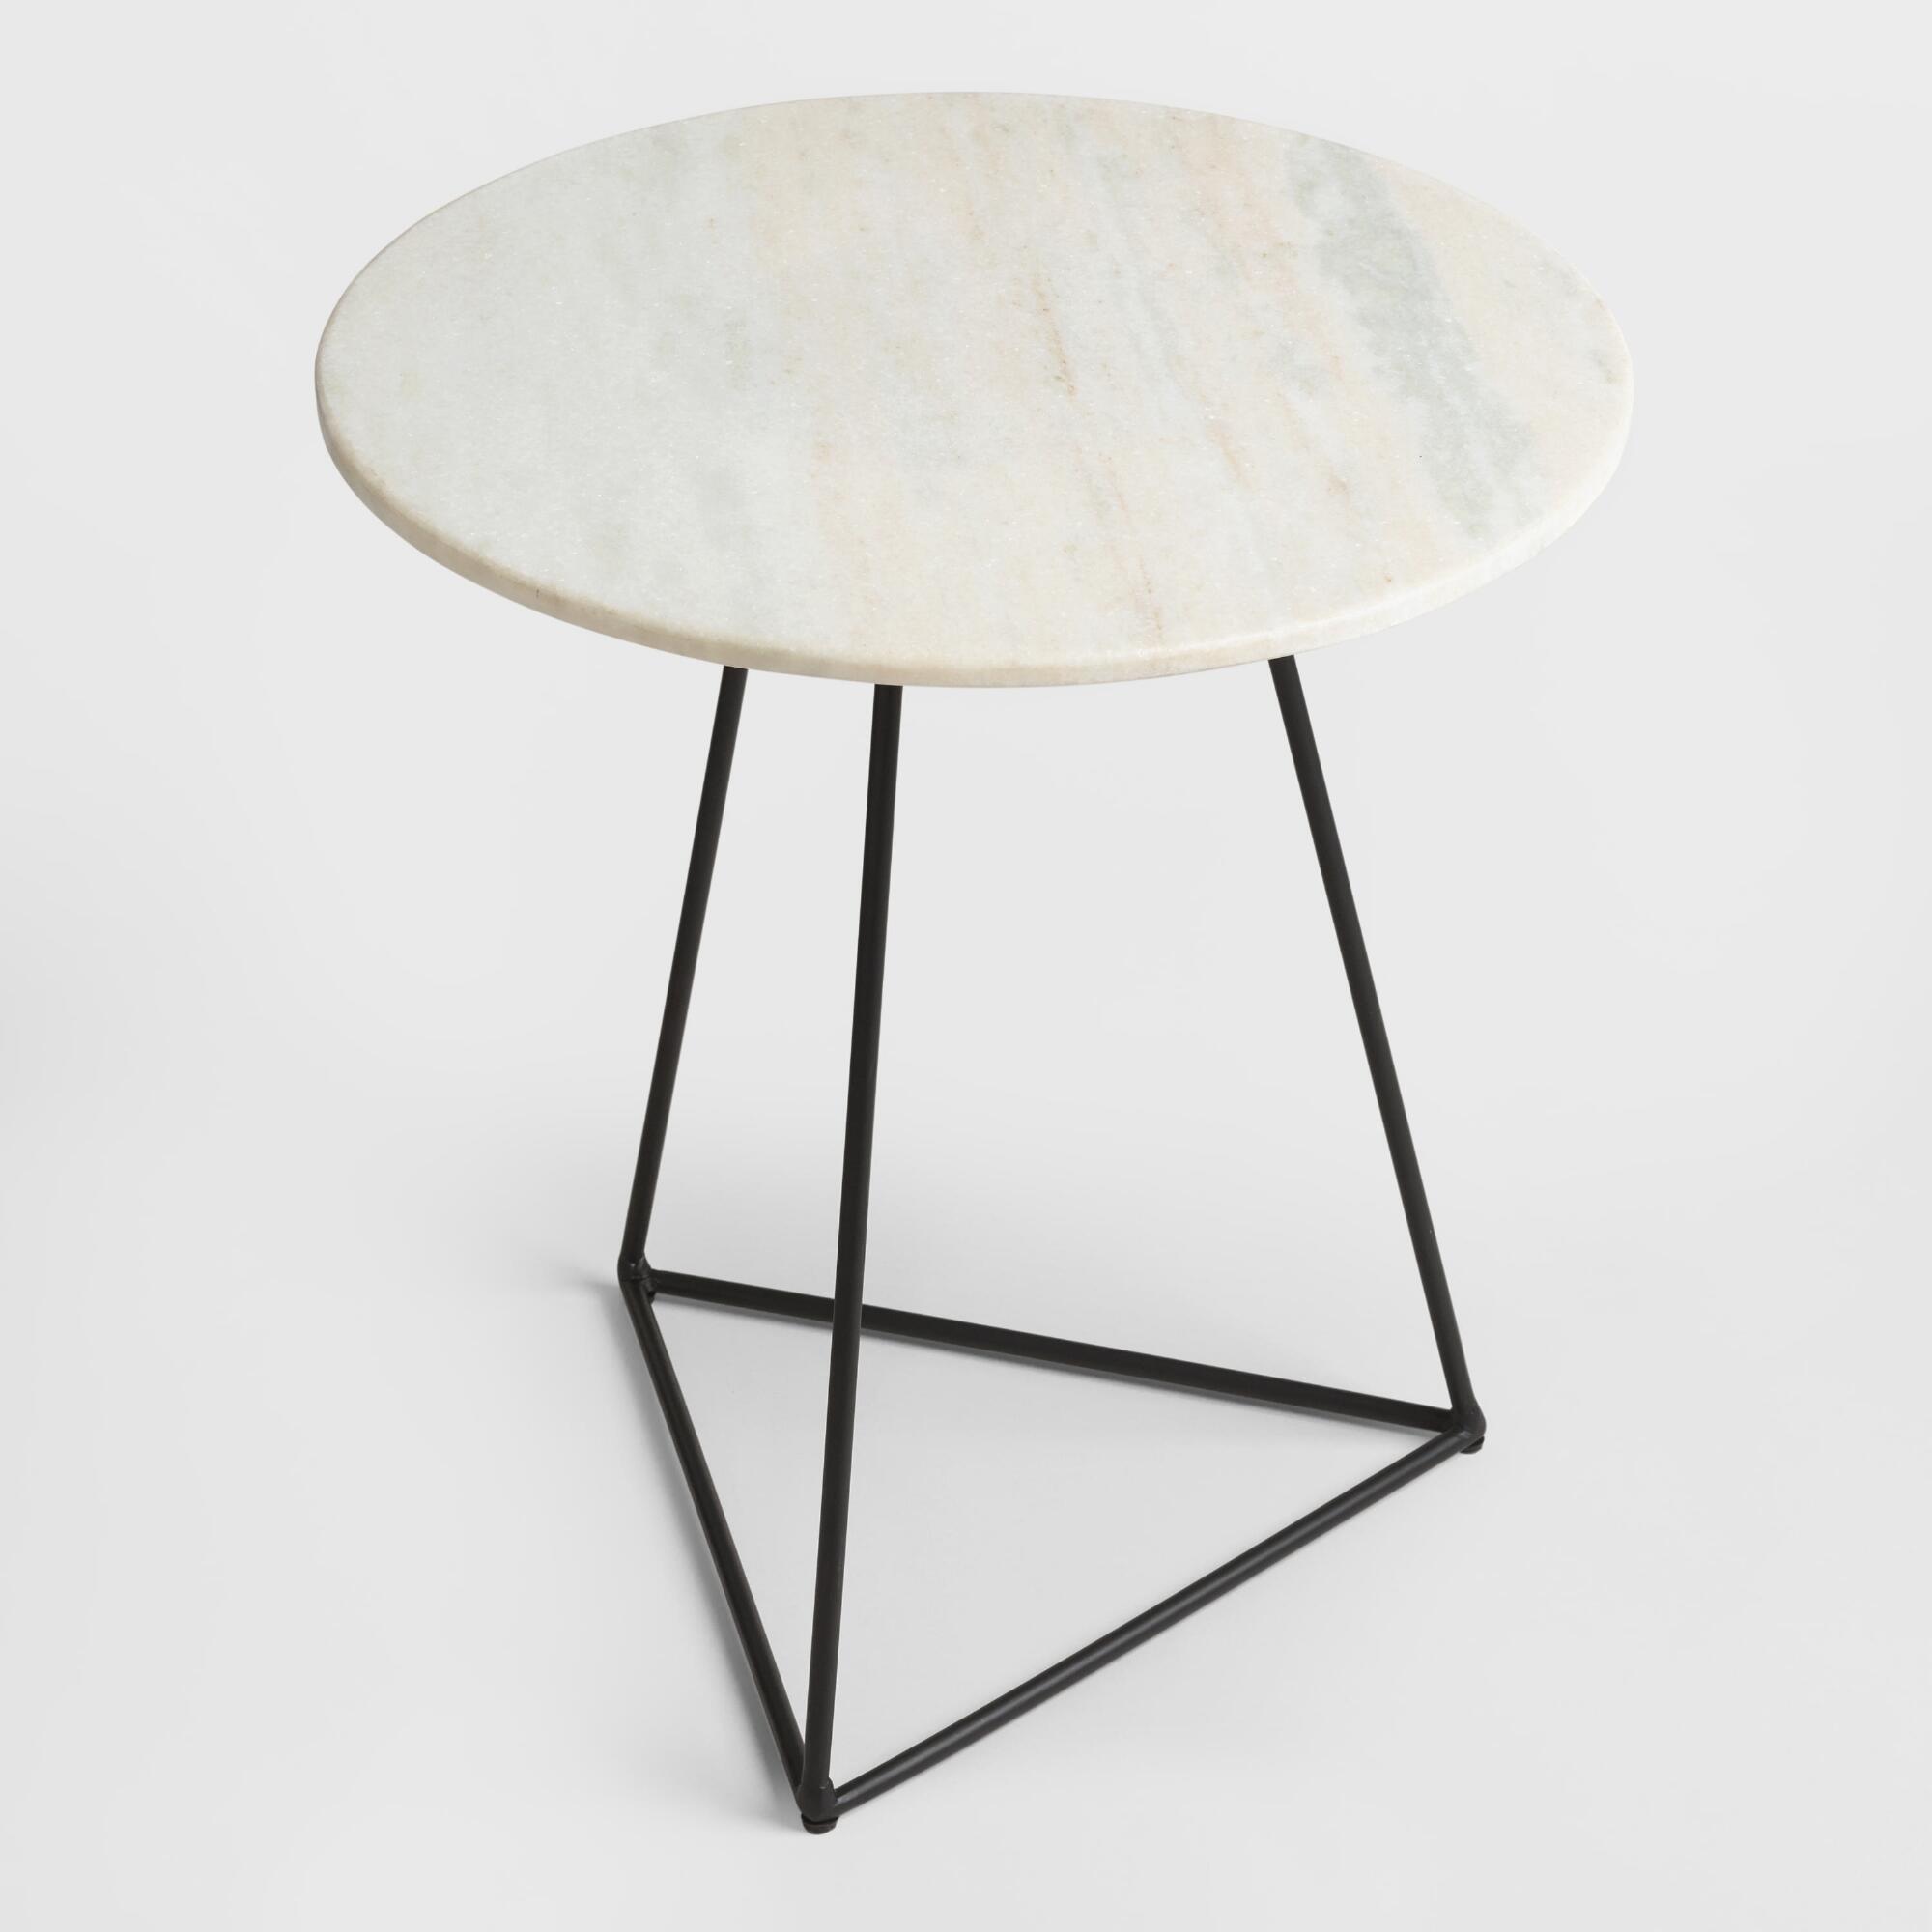 small wicker end table the super cool off white distressed marble and metal round accent world market iipsrv fcgi tables argos chair covers new coffee farmhouse old wooden trunks